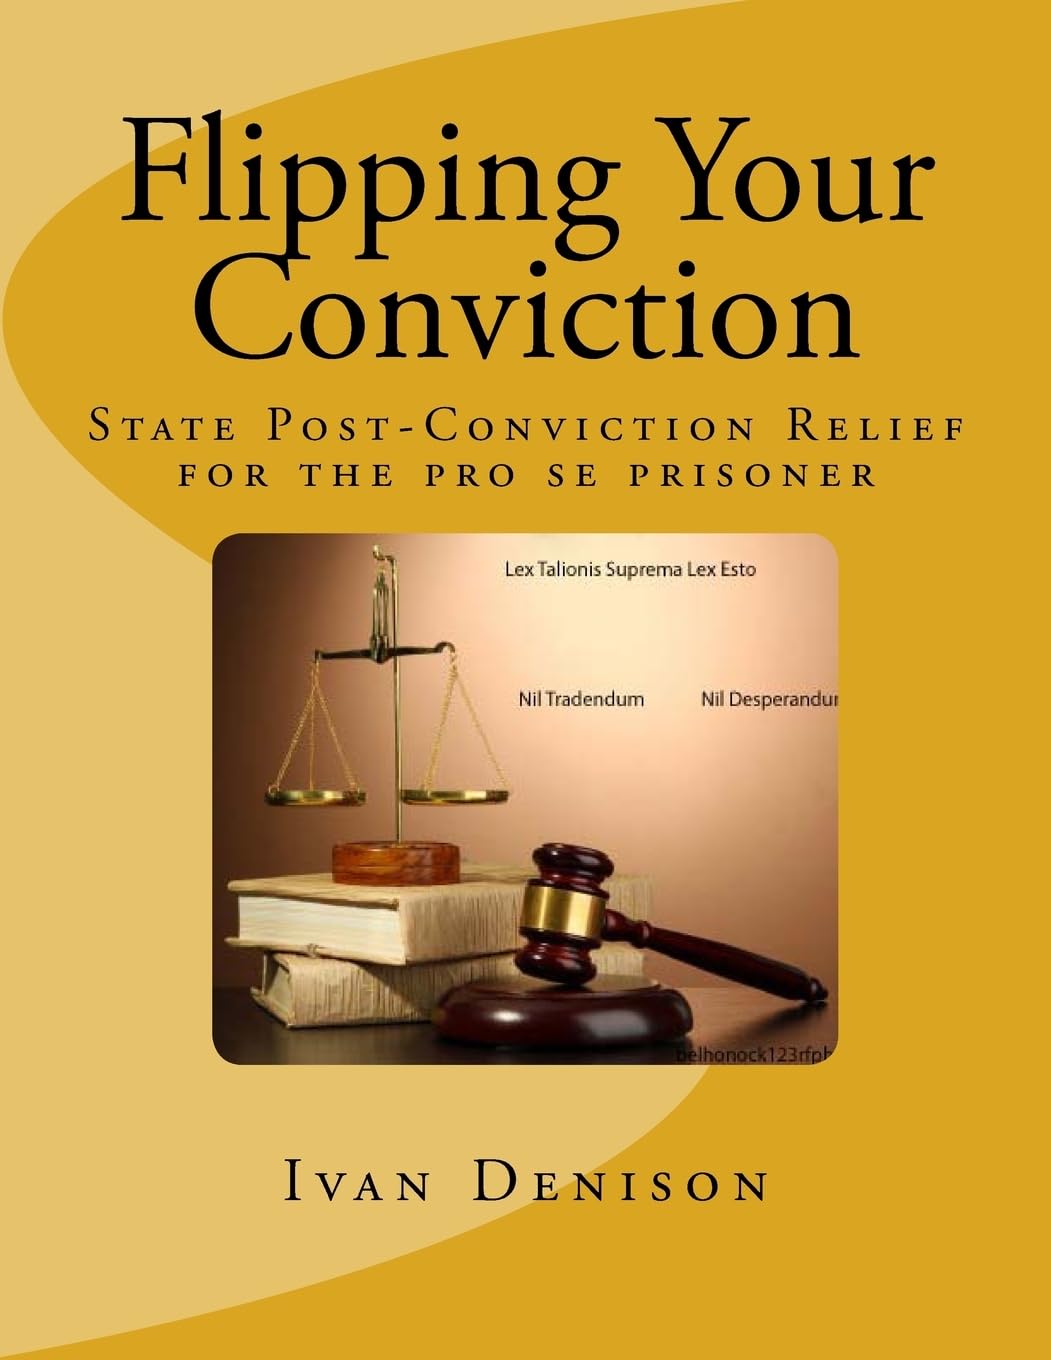 Flipping Your Conviction - State Post-Conviction Relief for the Pro Se Prisoner - CA Corrections Bookstore